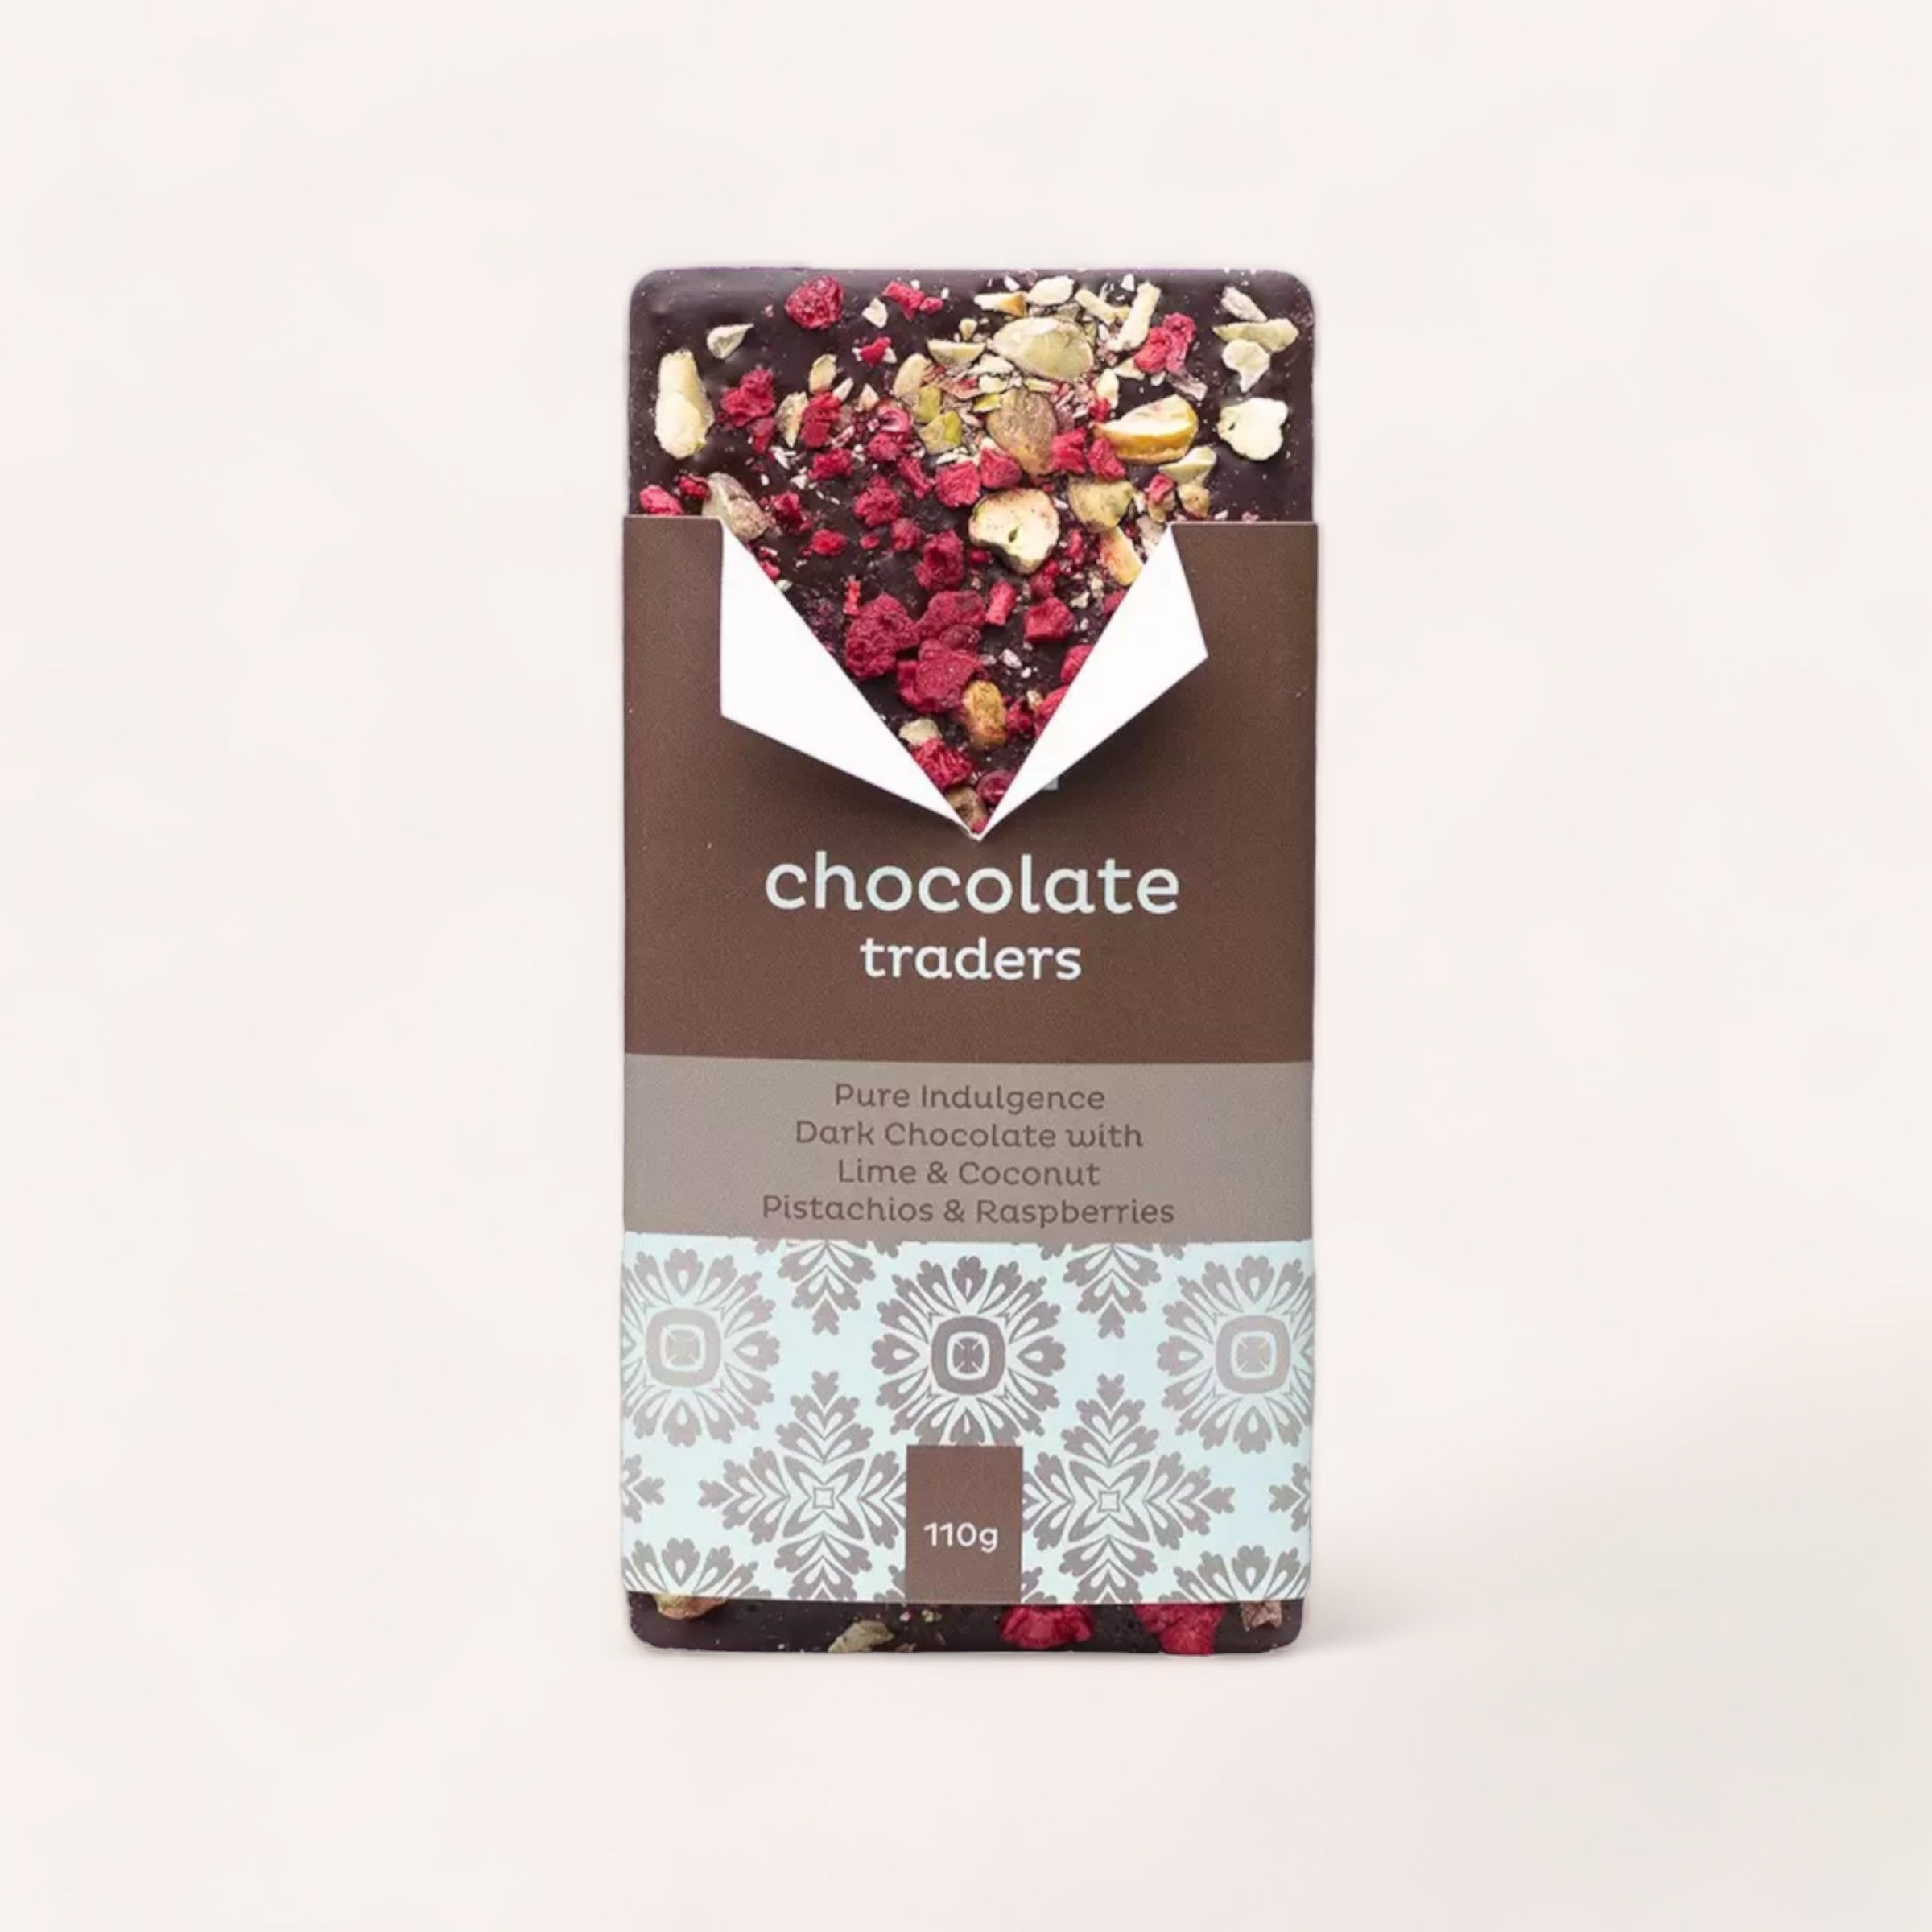 Artisan Pure Indulgence Lime, Coconut, Pistachios & Raspberries dark chocolate bar by Chocolate Traders against a neutral background; a perfect gift from New Zealand.